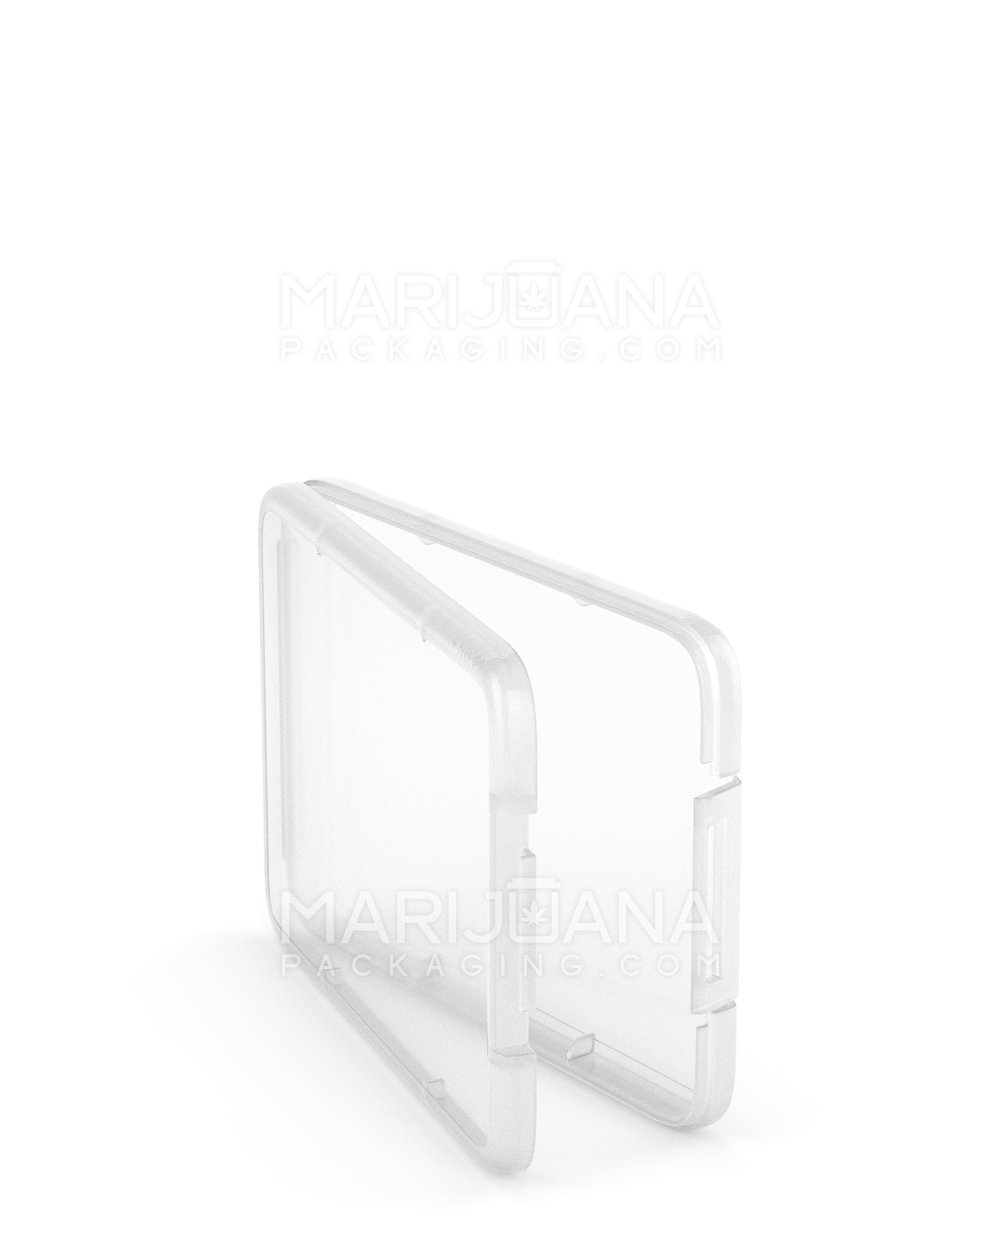 Hinged Lid Slim Shatter Container | 5.3mm - Clear Plastic - 1000 Count - 4